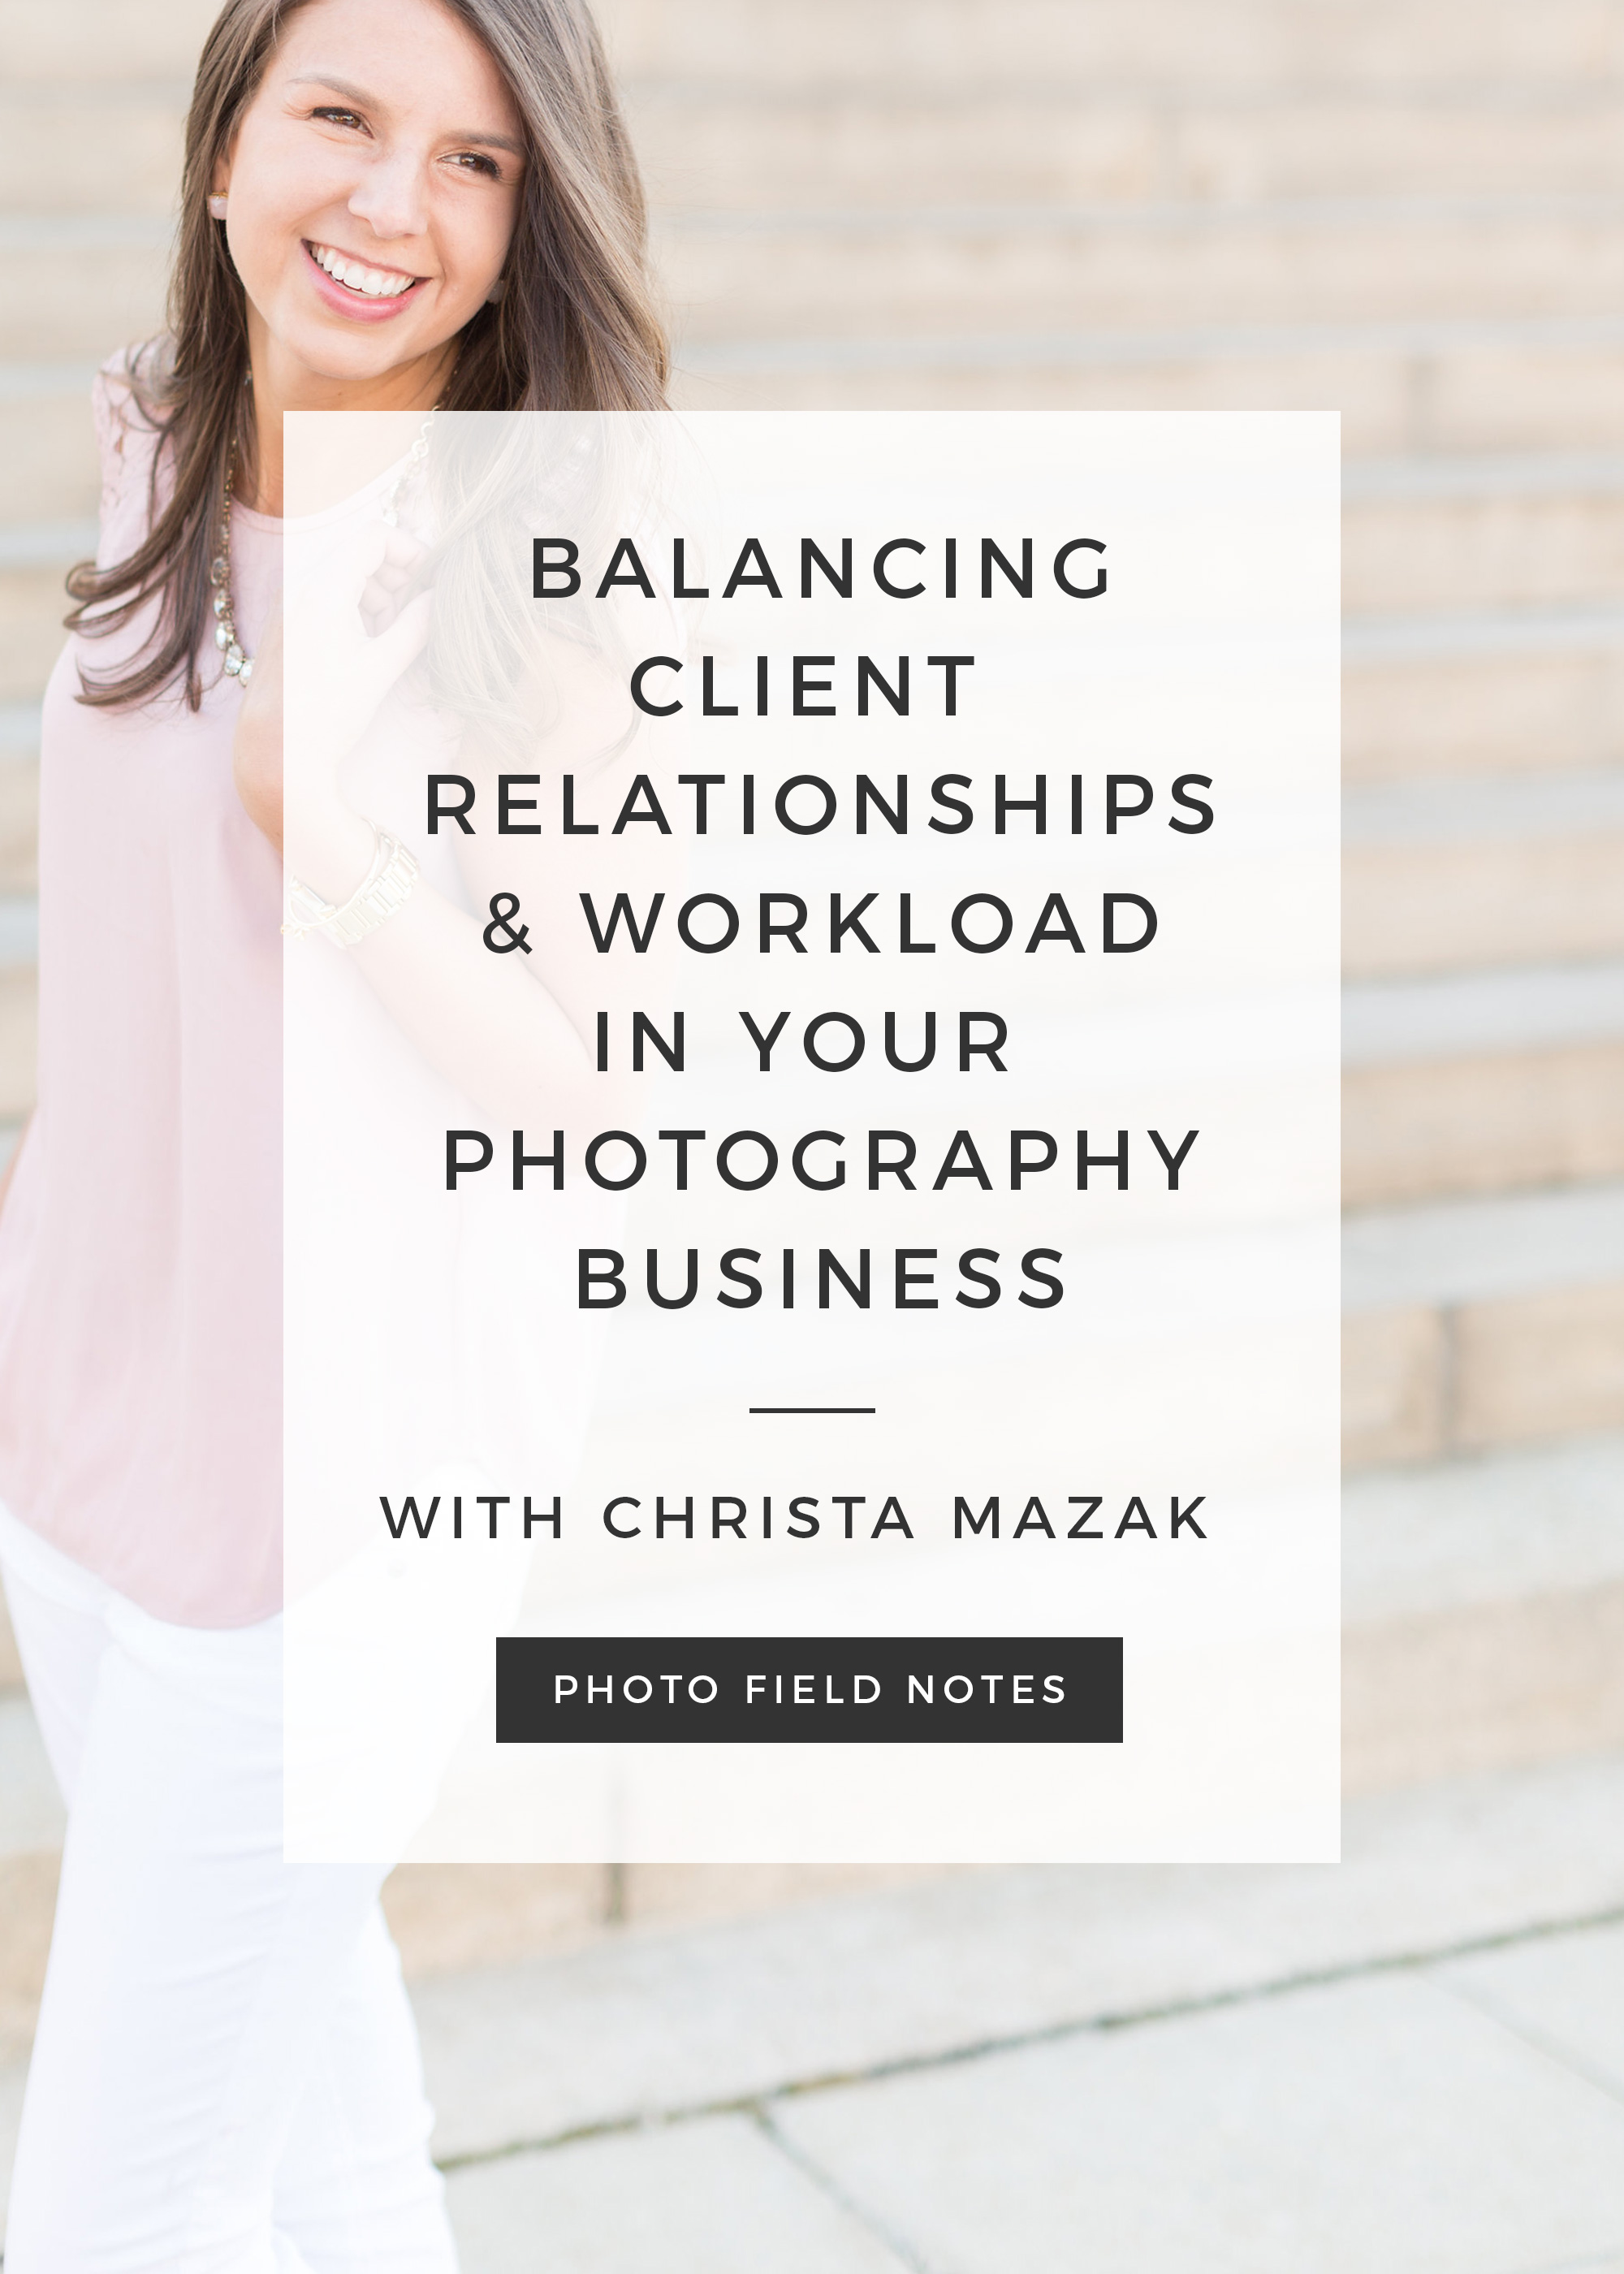 Balancing client relationships and workload in your photography business